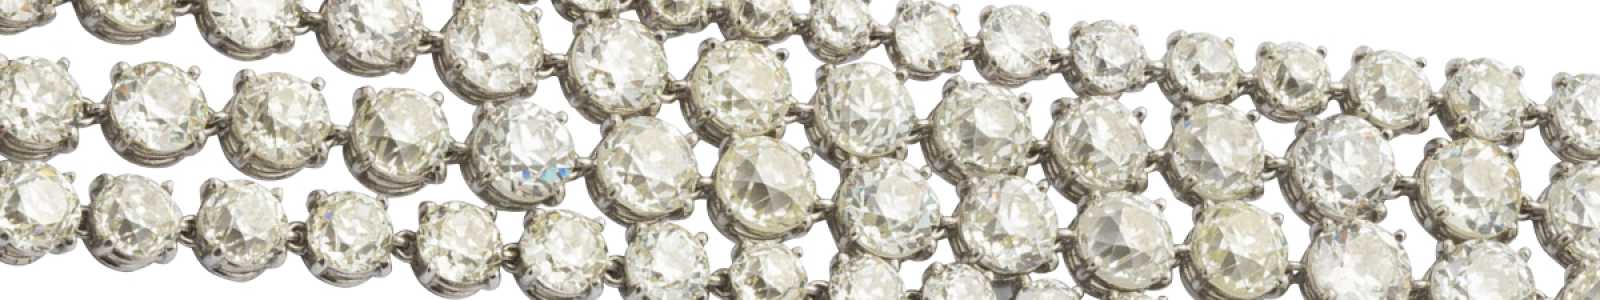 Magnificent Jewels including the Alrosa Spectacle Diamond